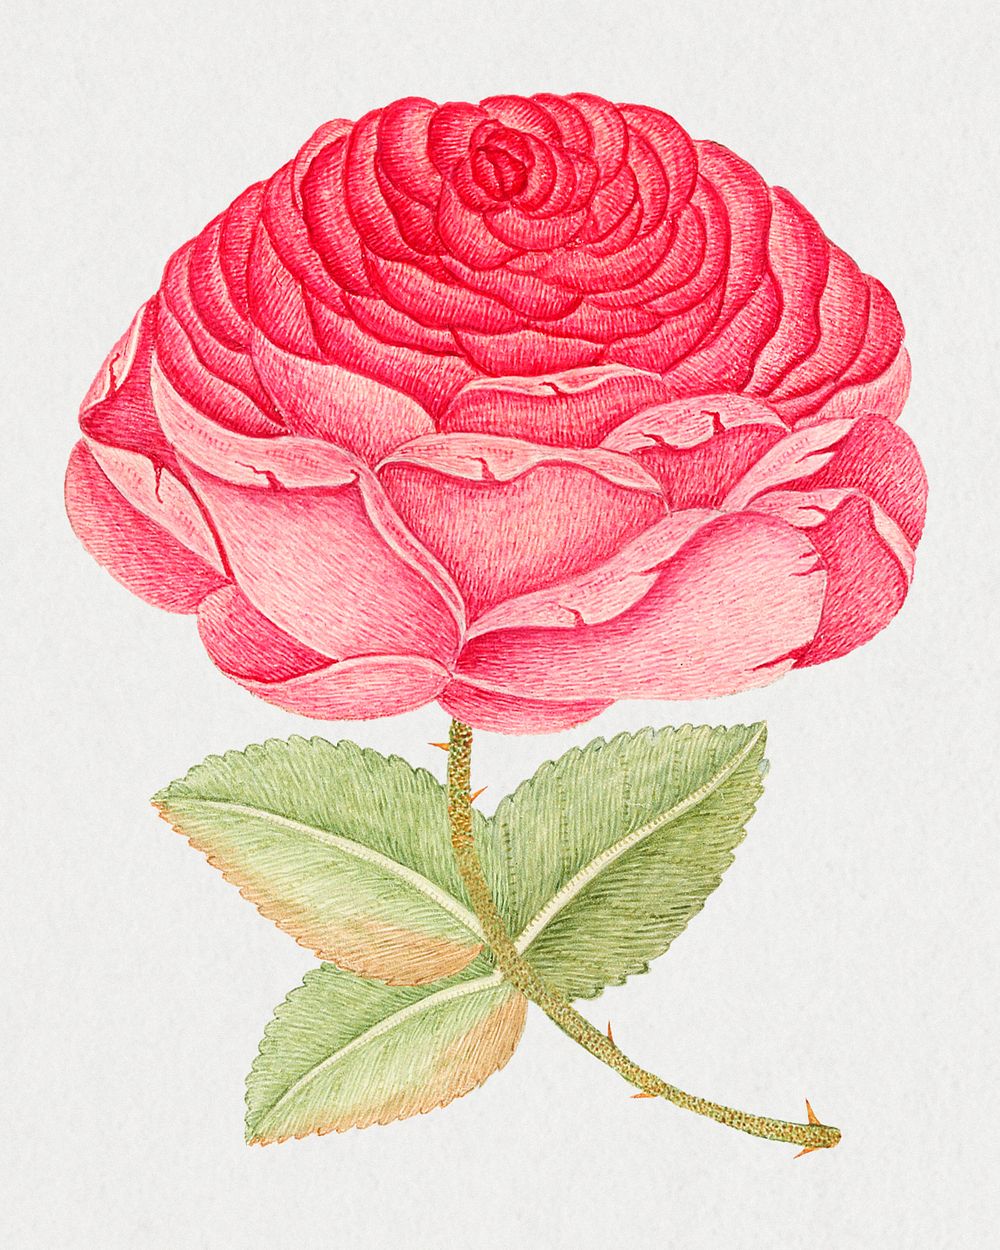 Vintage pink rose psd illustration, remixed from the 18th-century artworks from the Smithsonian archive.